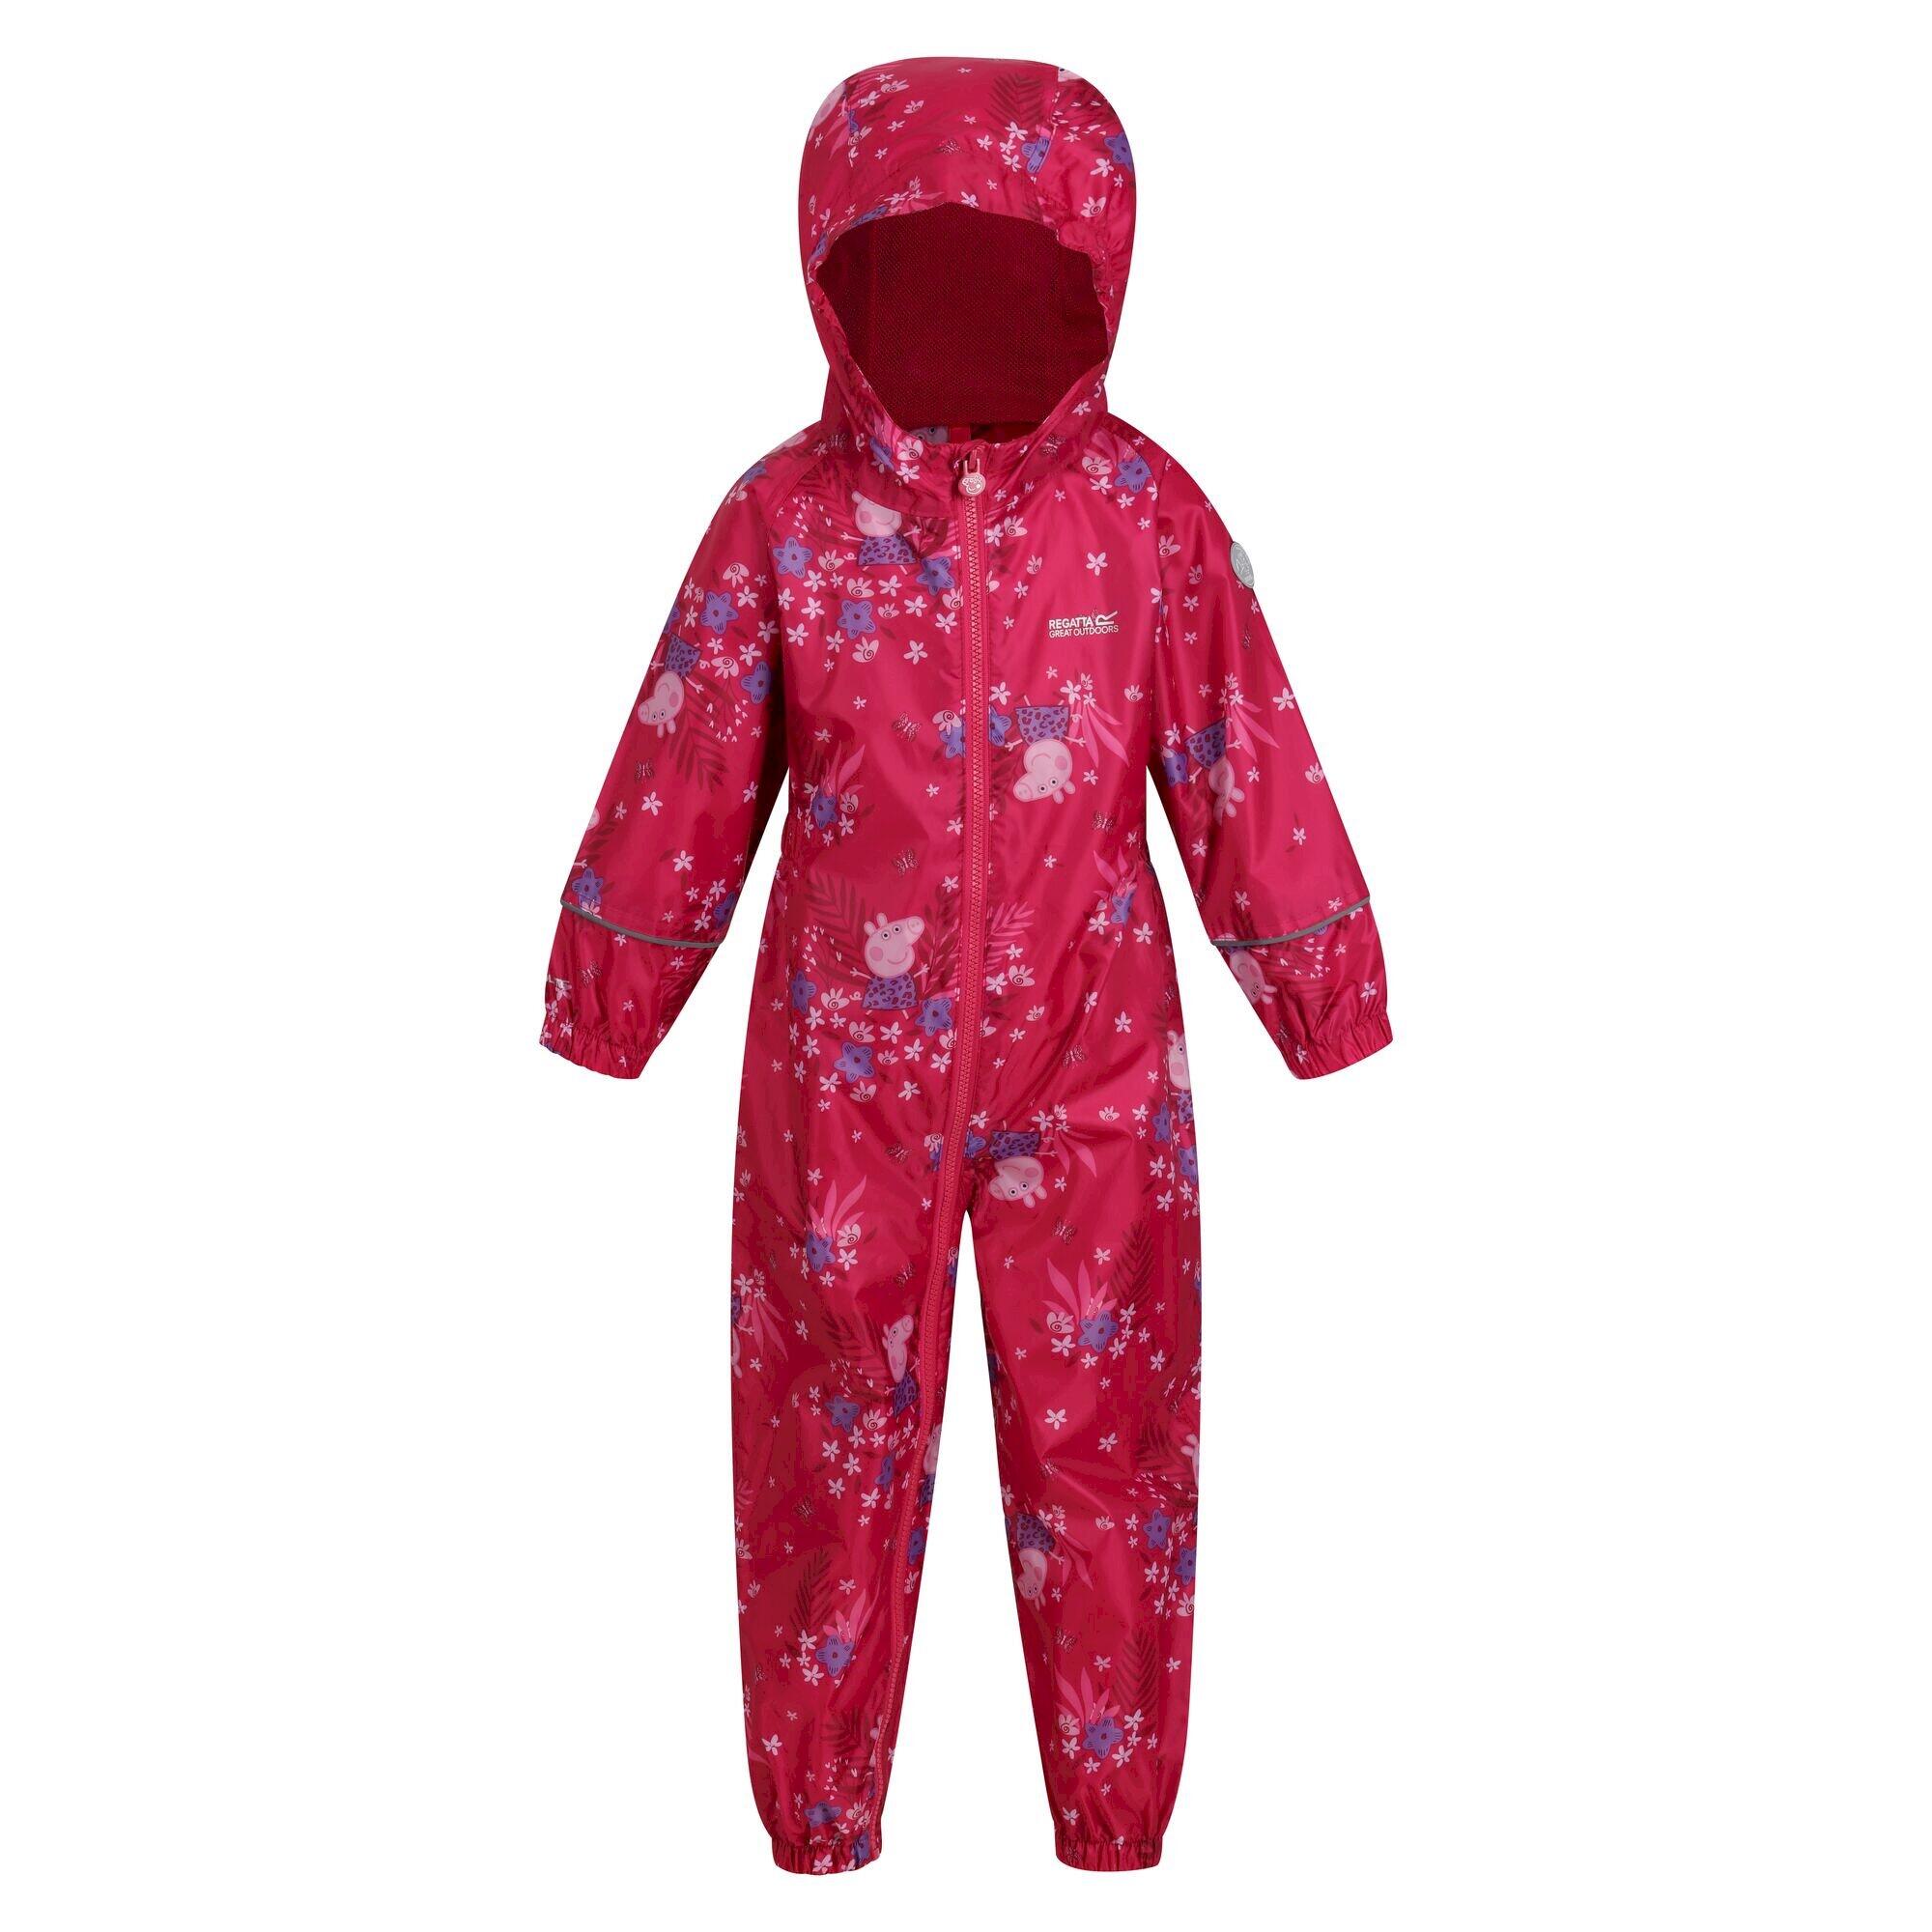 REGATTA Childrens/Kids Pobble Peppa Pig Floral Waterproof Puddle Suit (Pink Fusion)